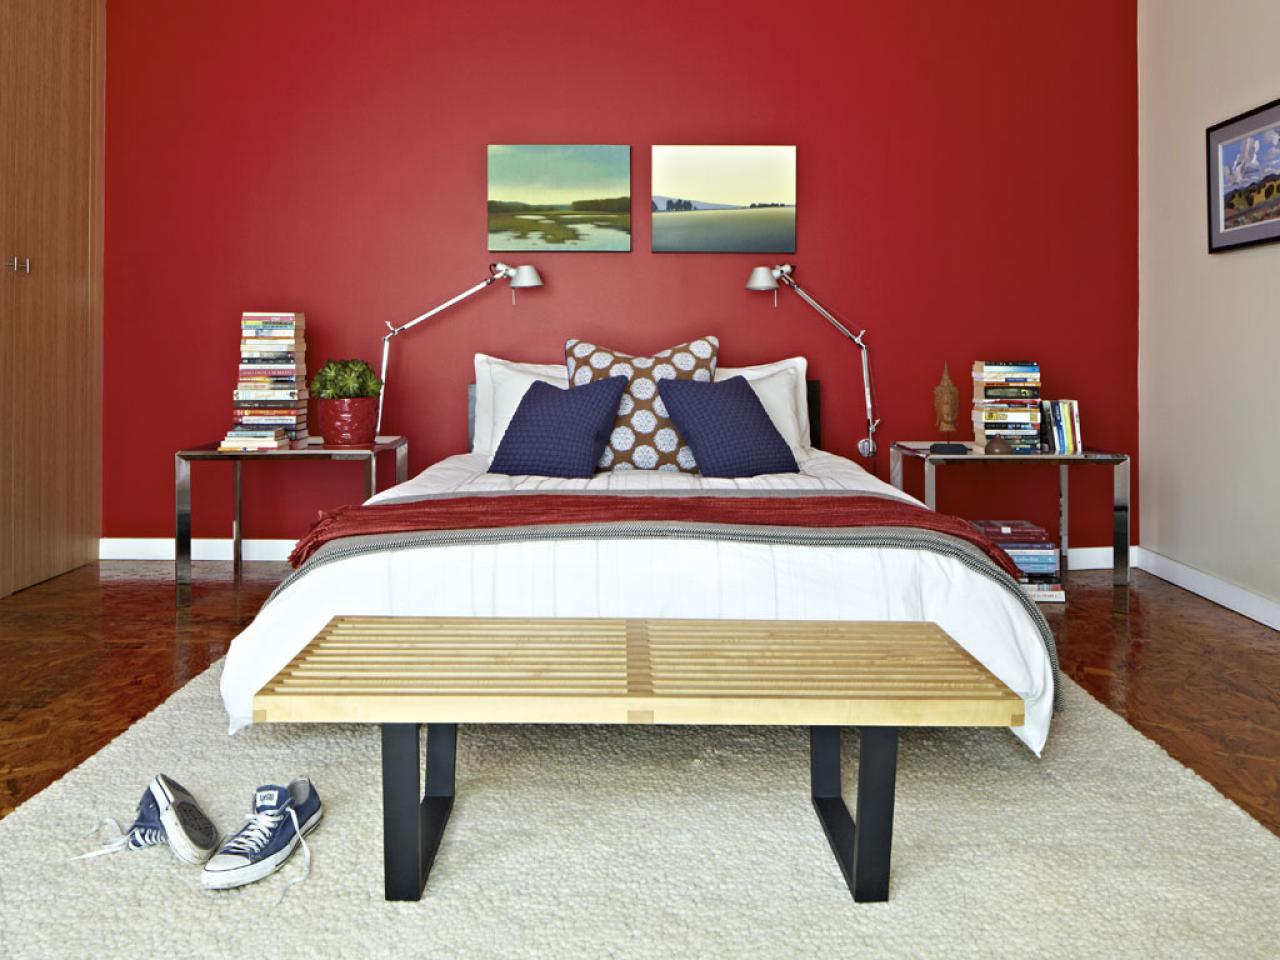 Good Bedroom Color Schemes Pictures Options Ideas HGTV